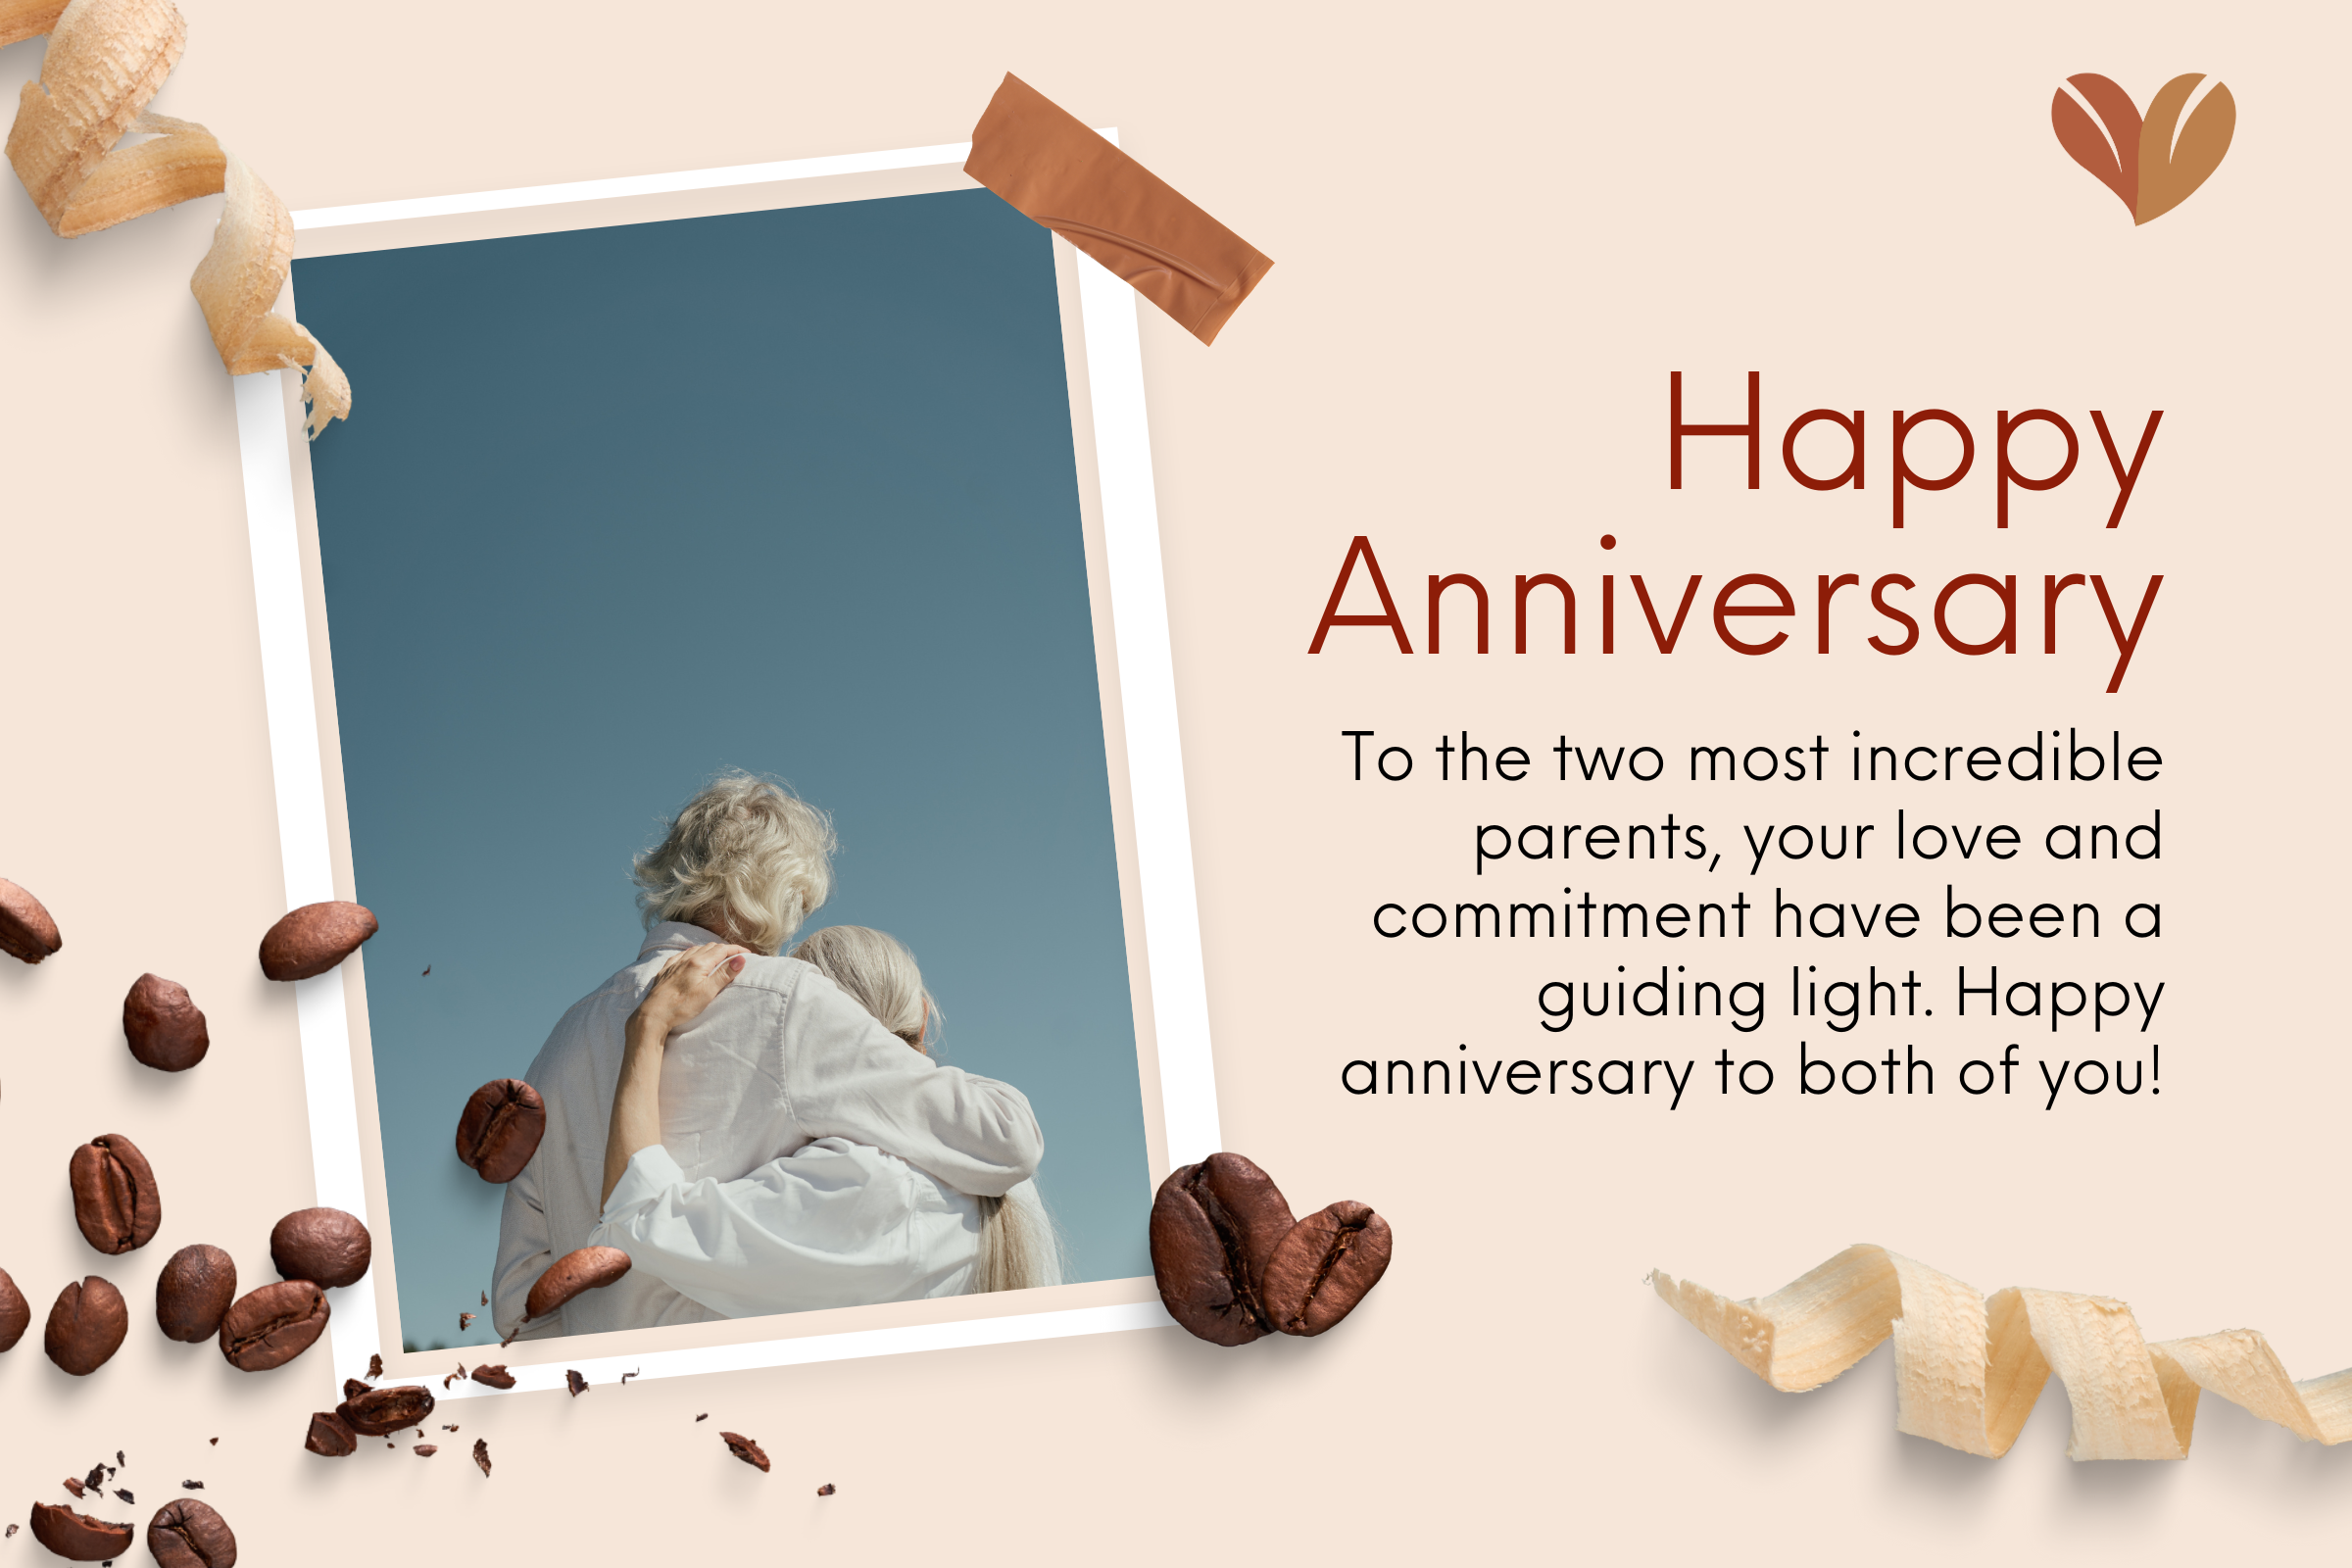 Happy Anniversary Wishes and Messages for Parents